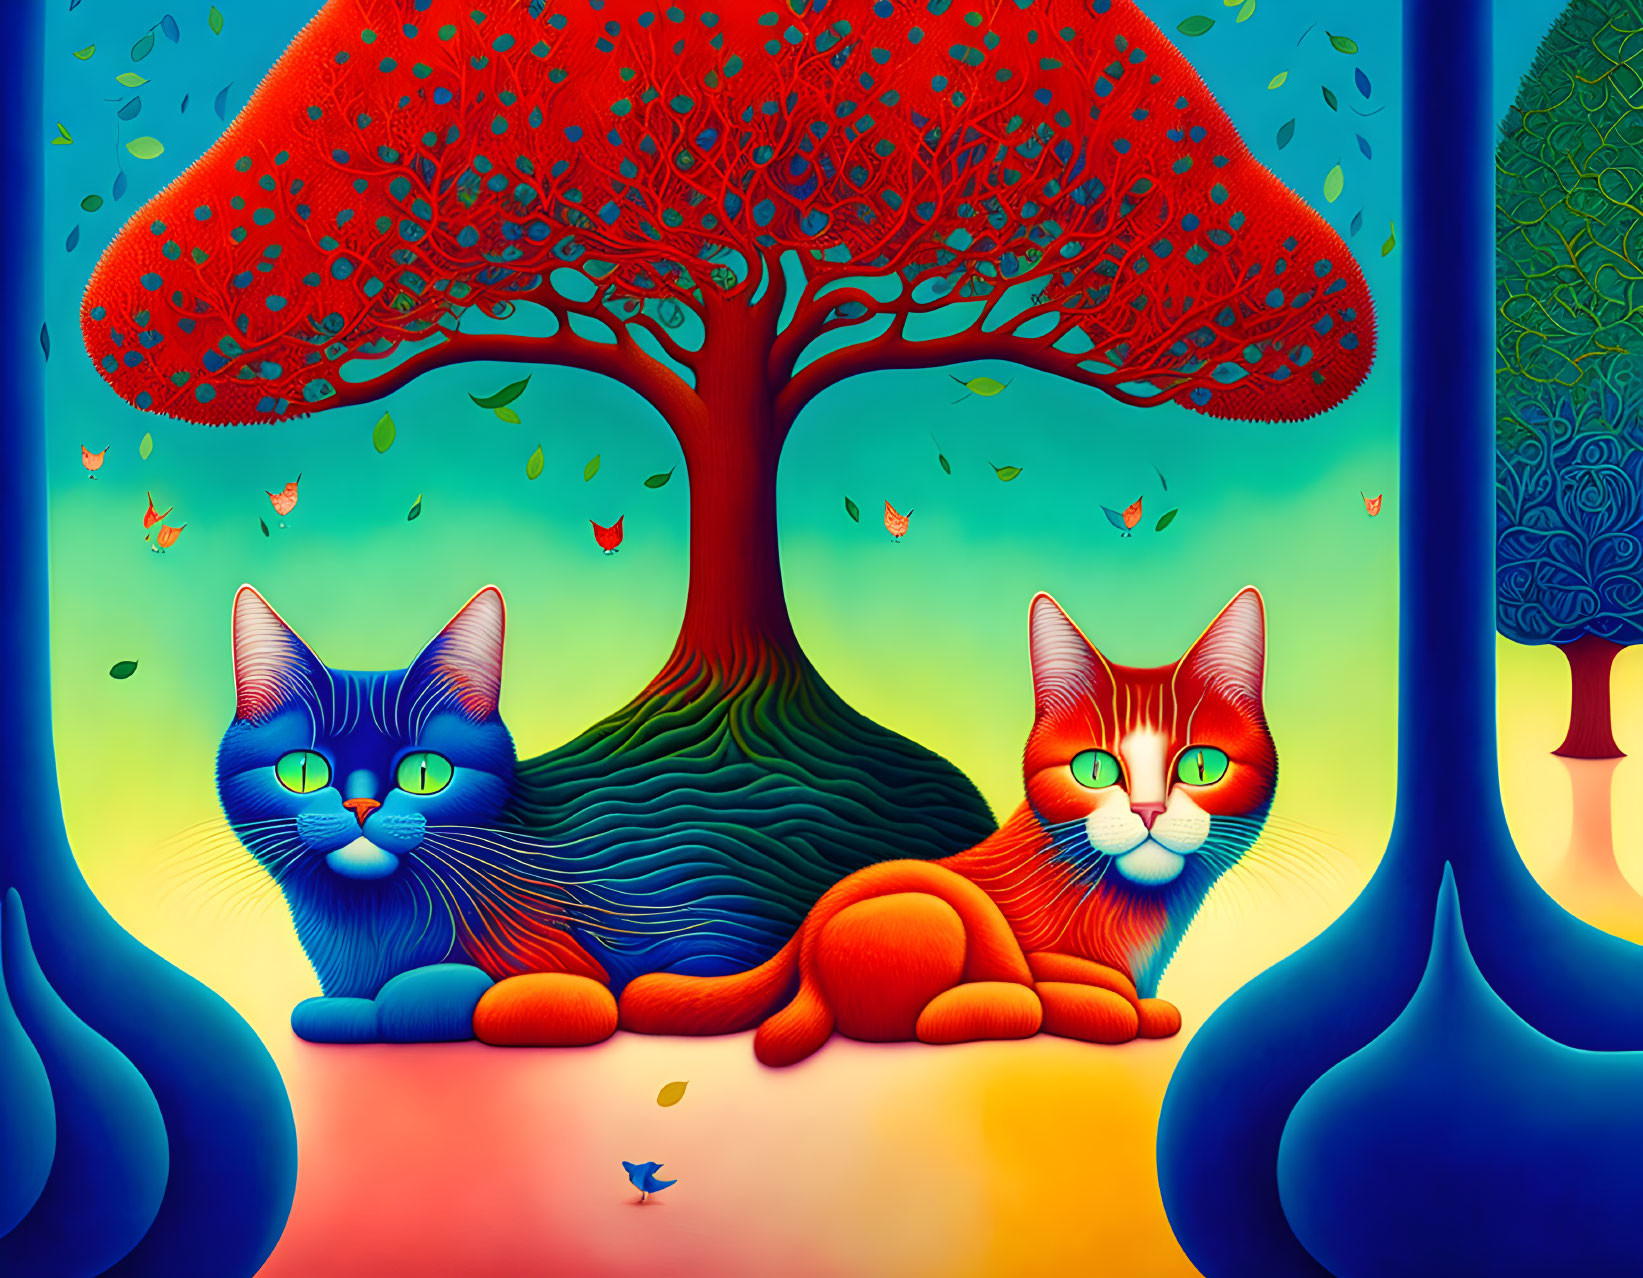 Red and blue cat in algae type tree forest, By Gra